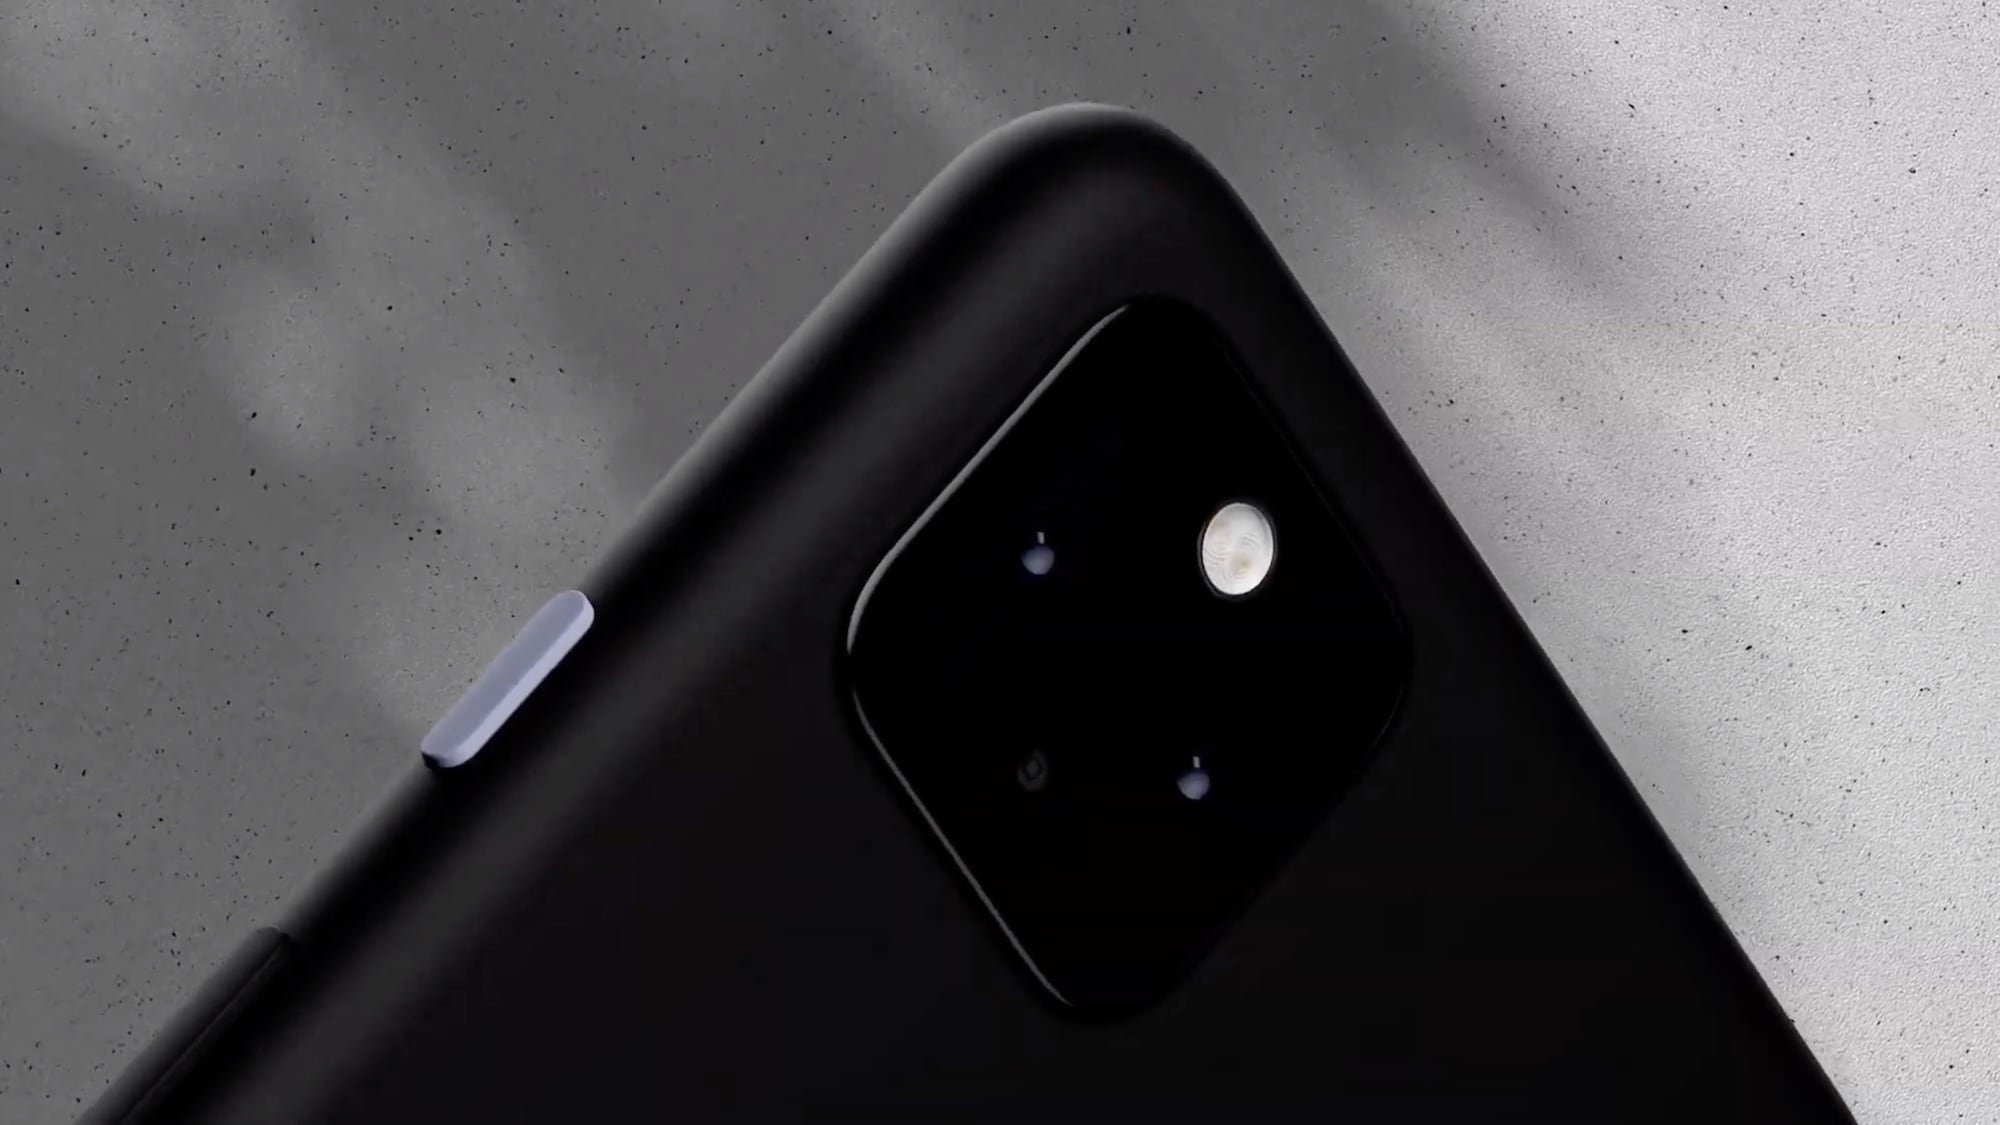 Google Pixel 4a 5G smartphone offers a gorgeous edge-to-edge display